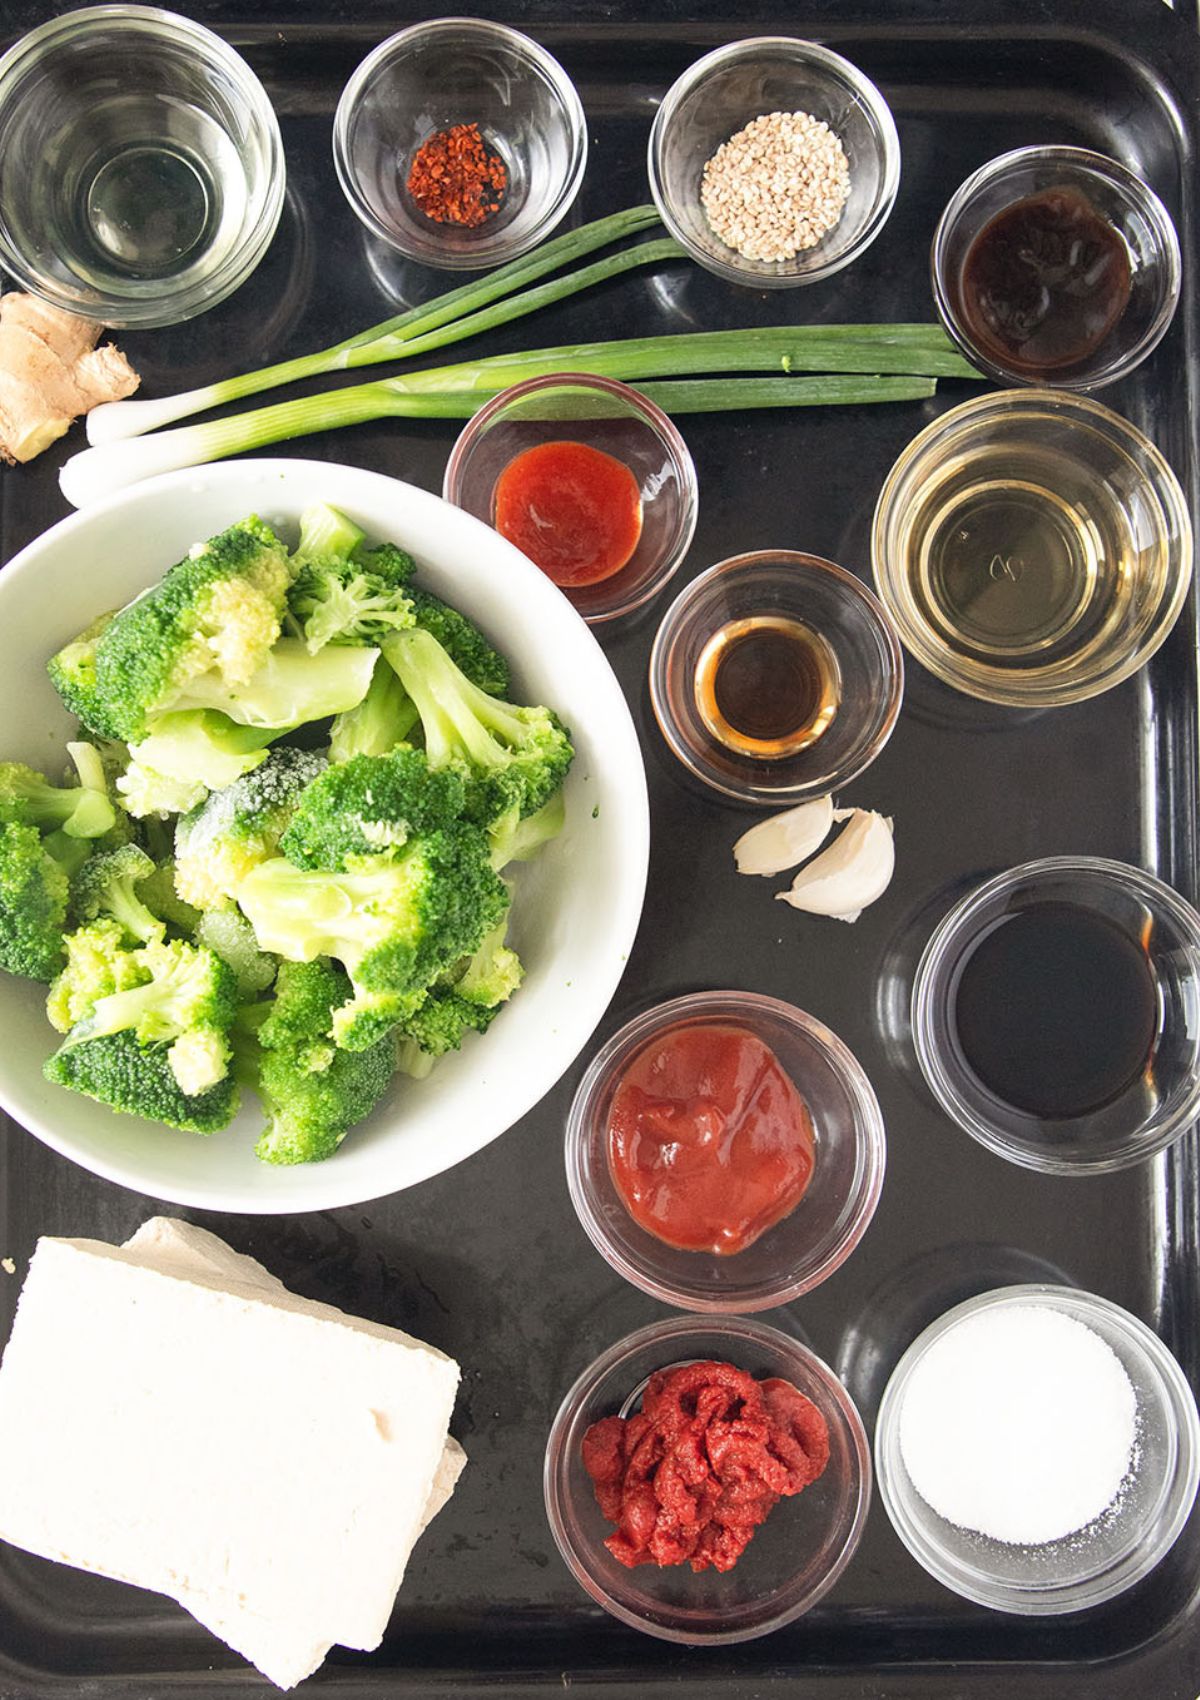 all the ingredients for making stir fry with broccoli, tofu and sweet and sour sauce.